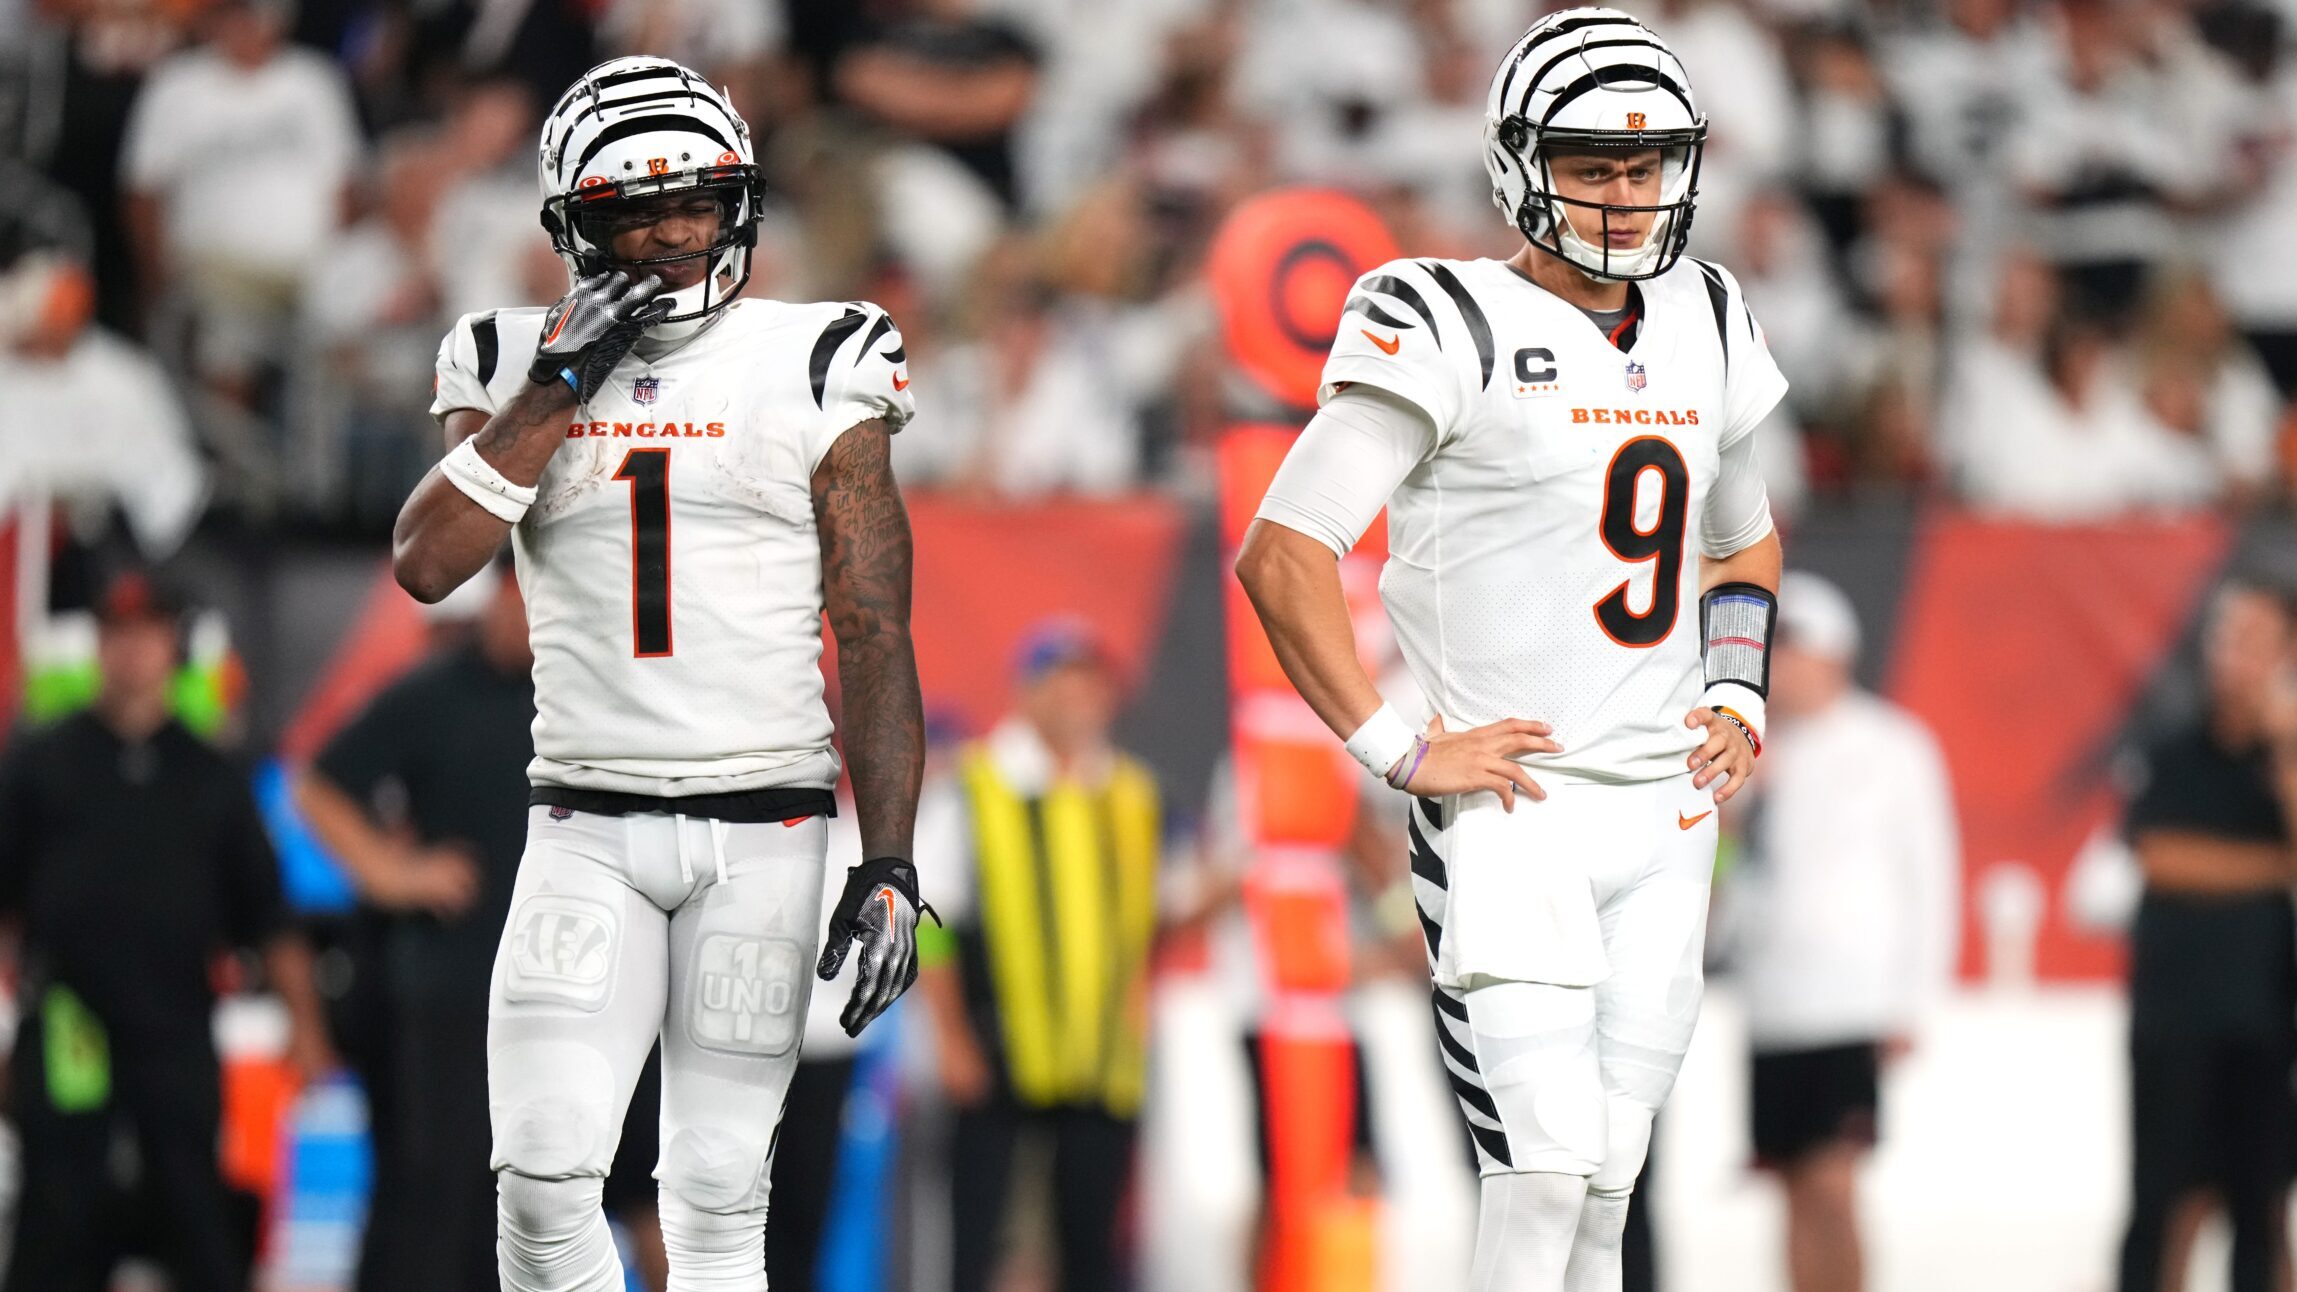 Should the Bengals be Worried About Joe Burrow and the Offense?